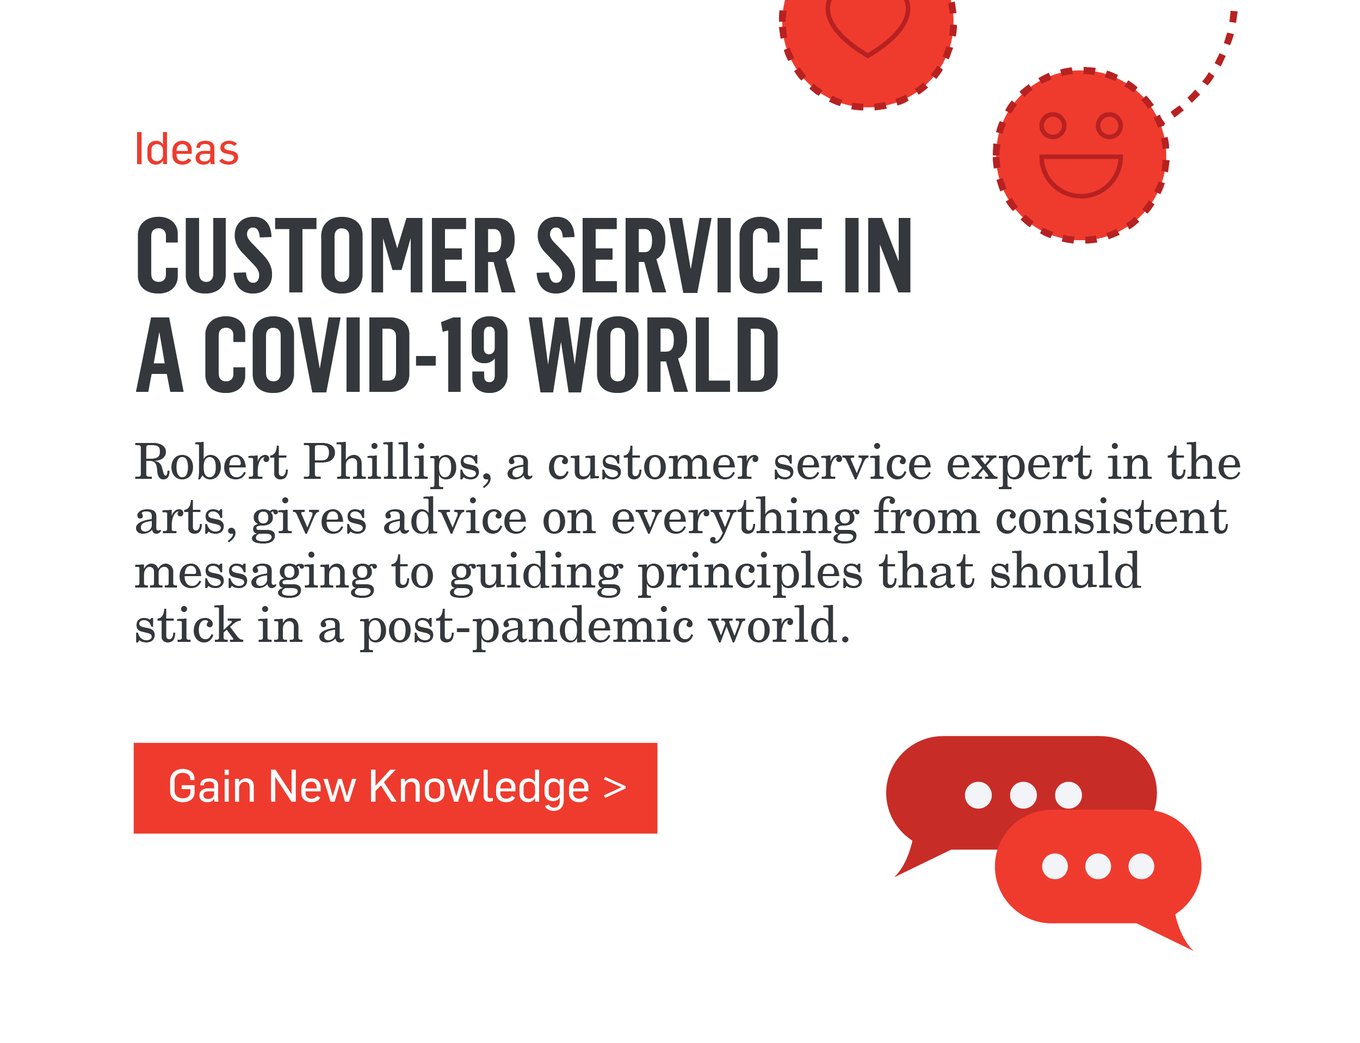 Ideas - CUSTOMER SERVICE IN A COVID-19 WORLD - Robert Phillips, a customer service expert in the arts, gives advice on everything from consistent messaging to guiding principles that should stick in a post-pandemic world. >>>Gain New Knowledge>>>